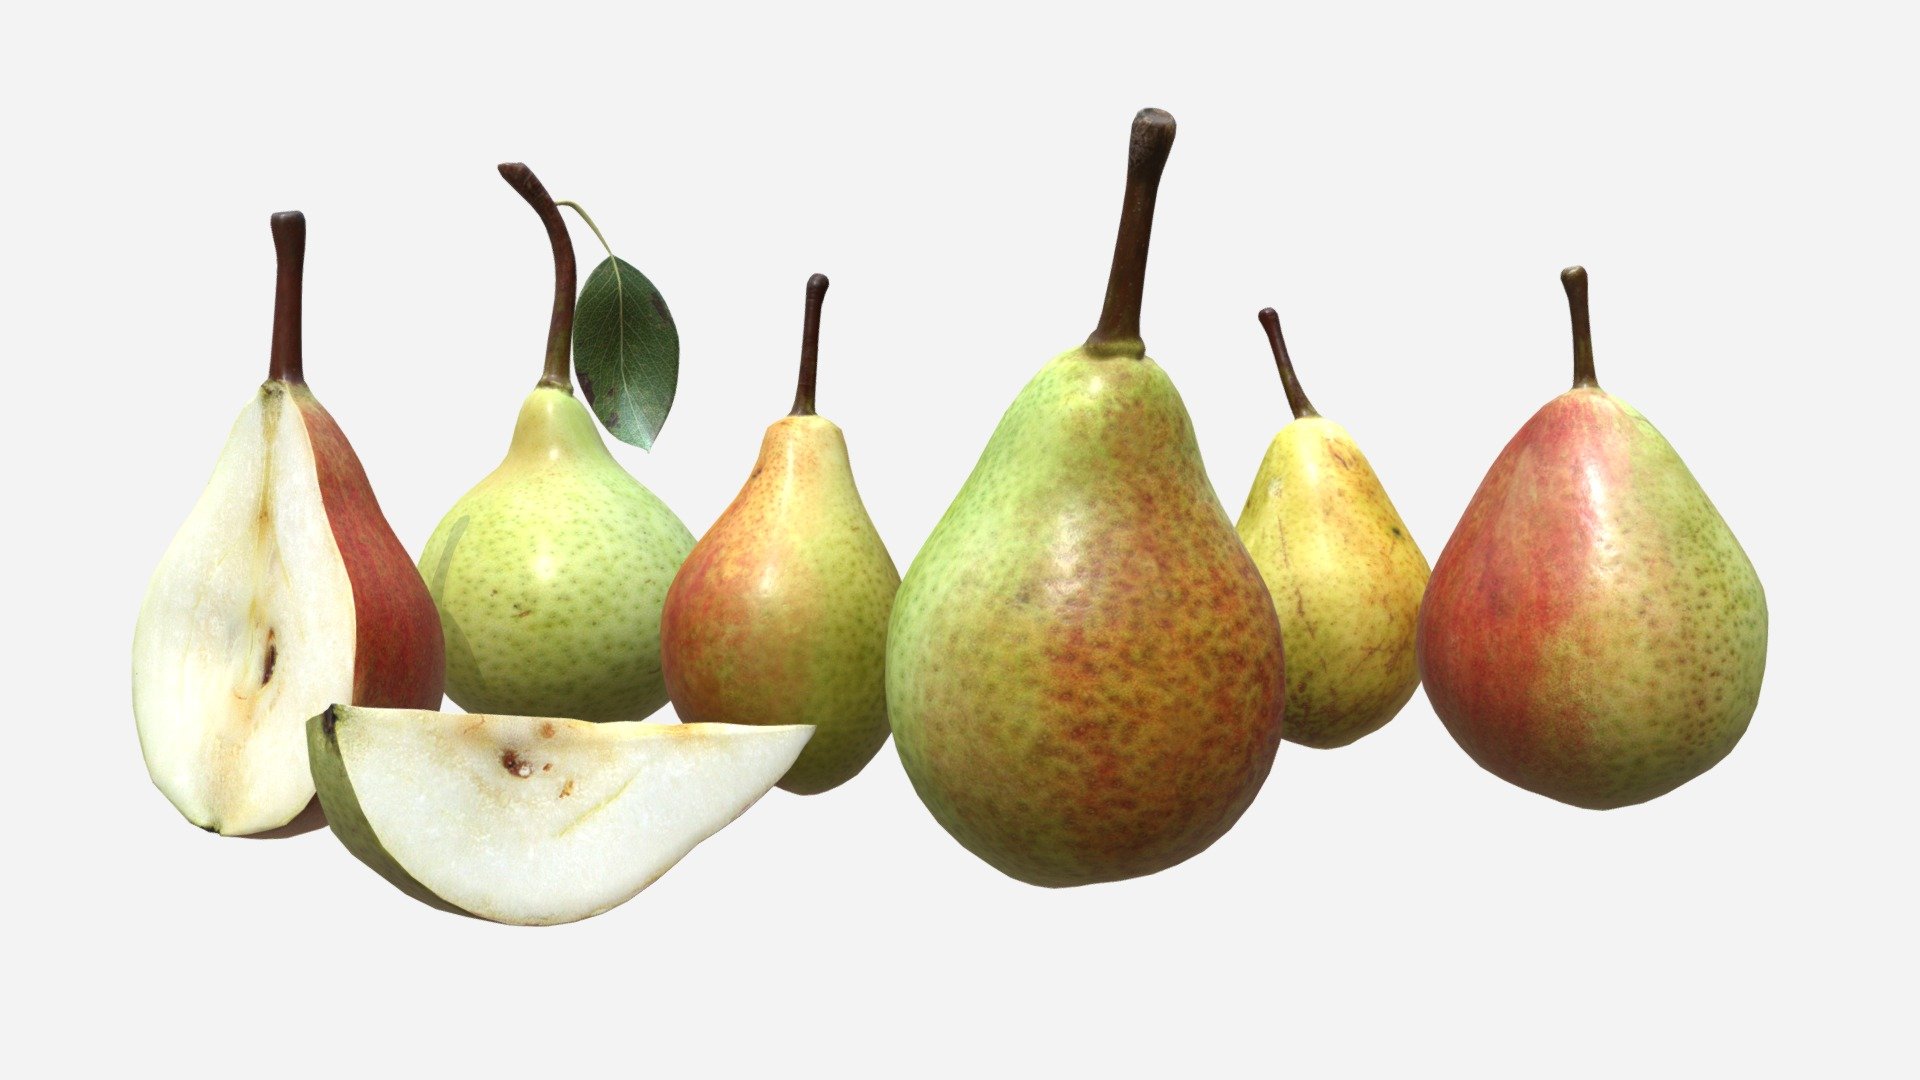 3d models of pears that grow in my garden. :)
 created Blender Version 2.78
 cycles render 
 -link removed- - Pear 3d model - 3D model by Wazzabi 3d model